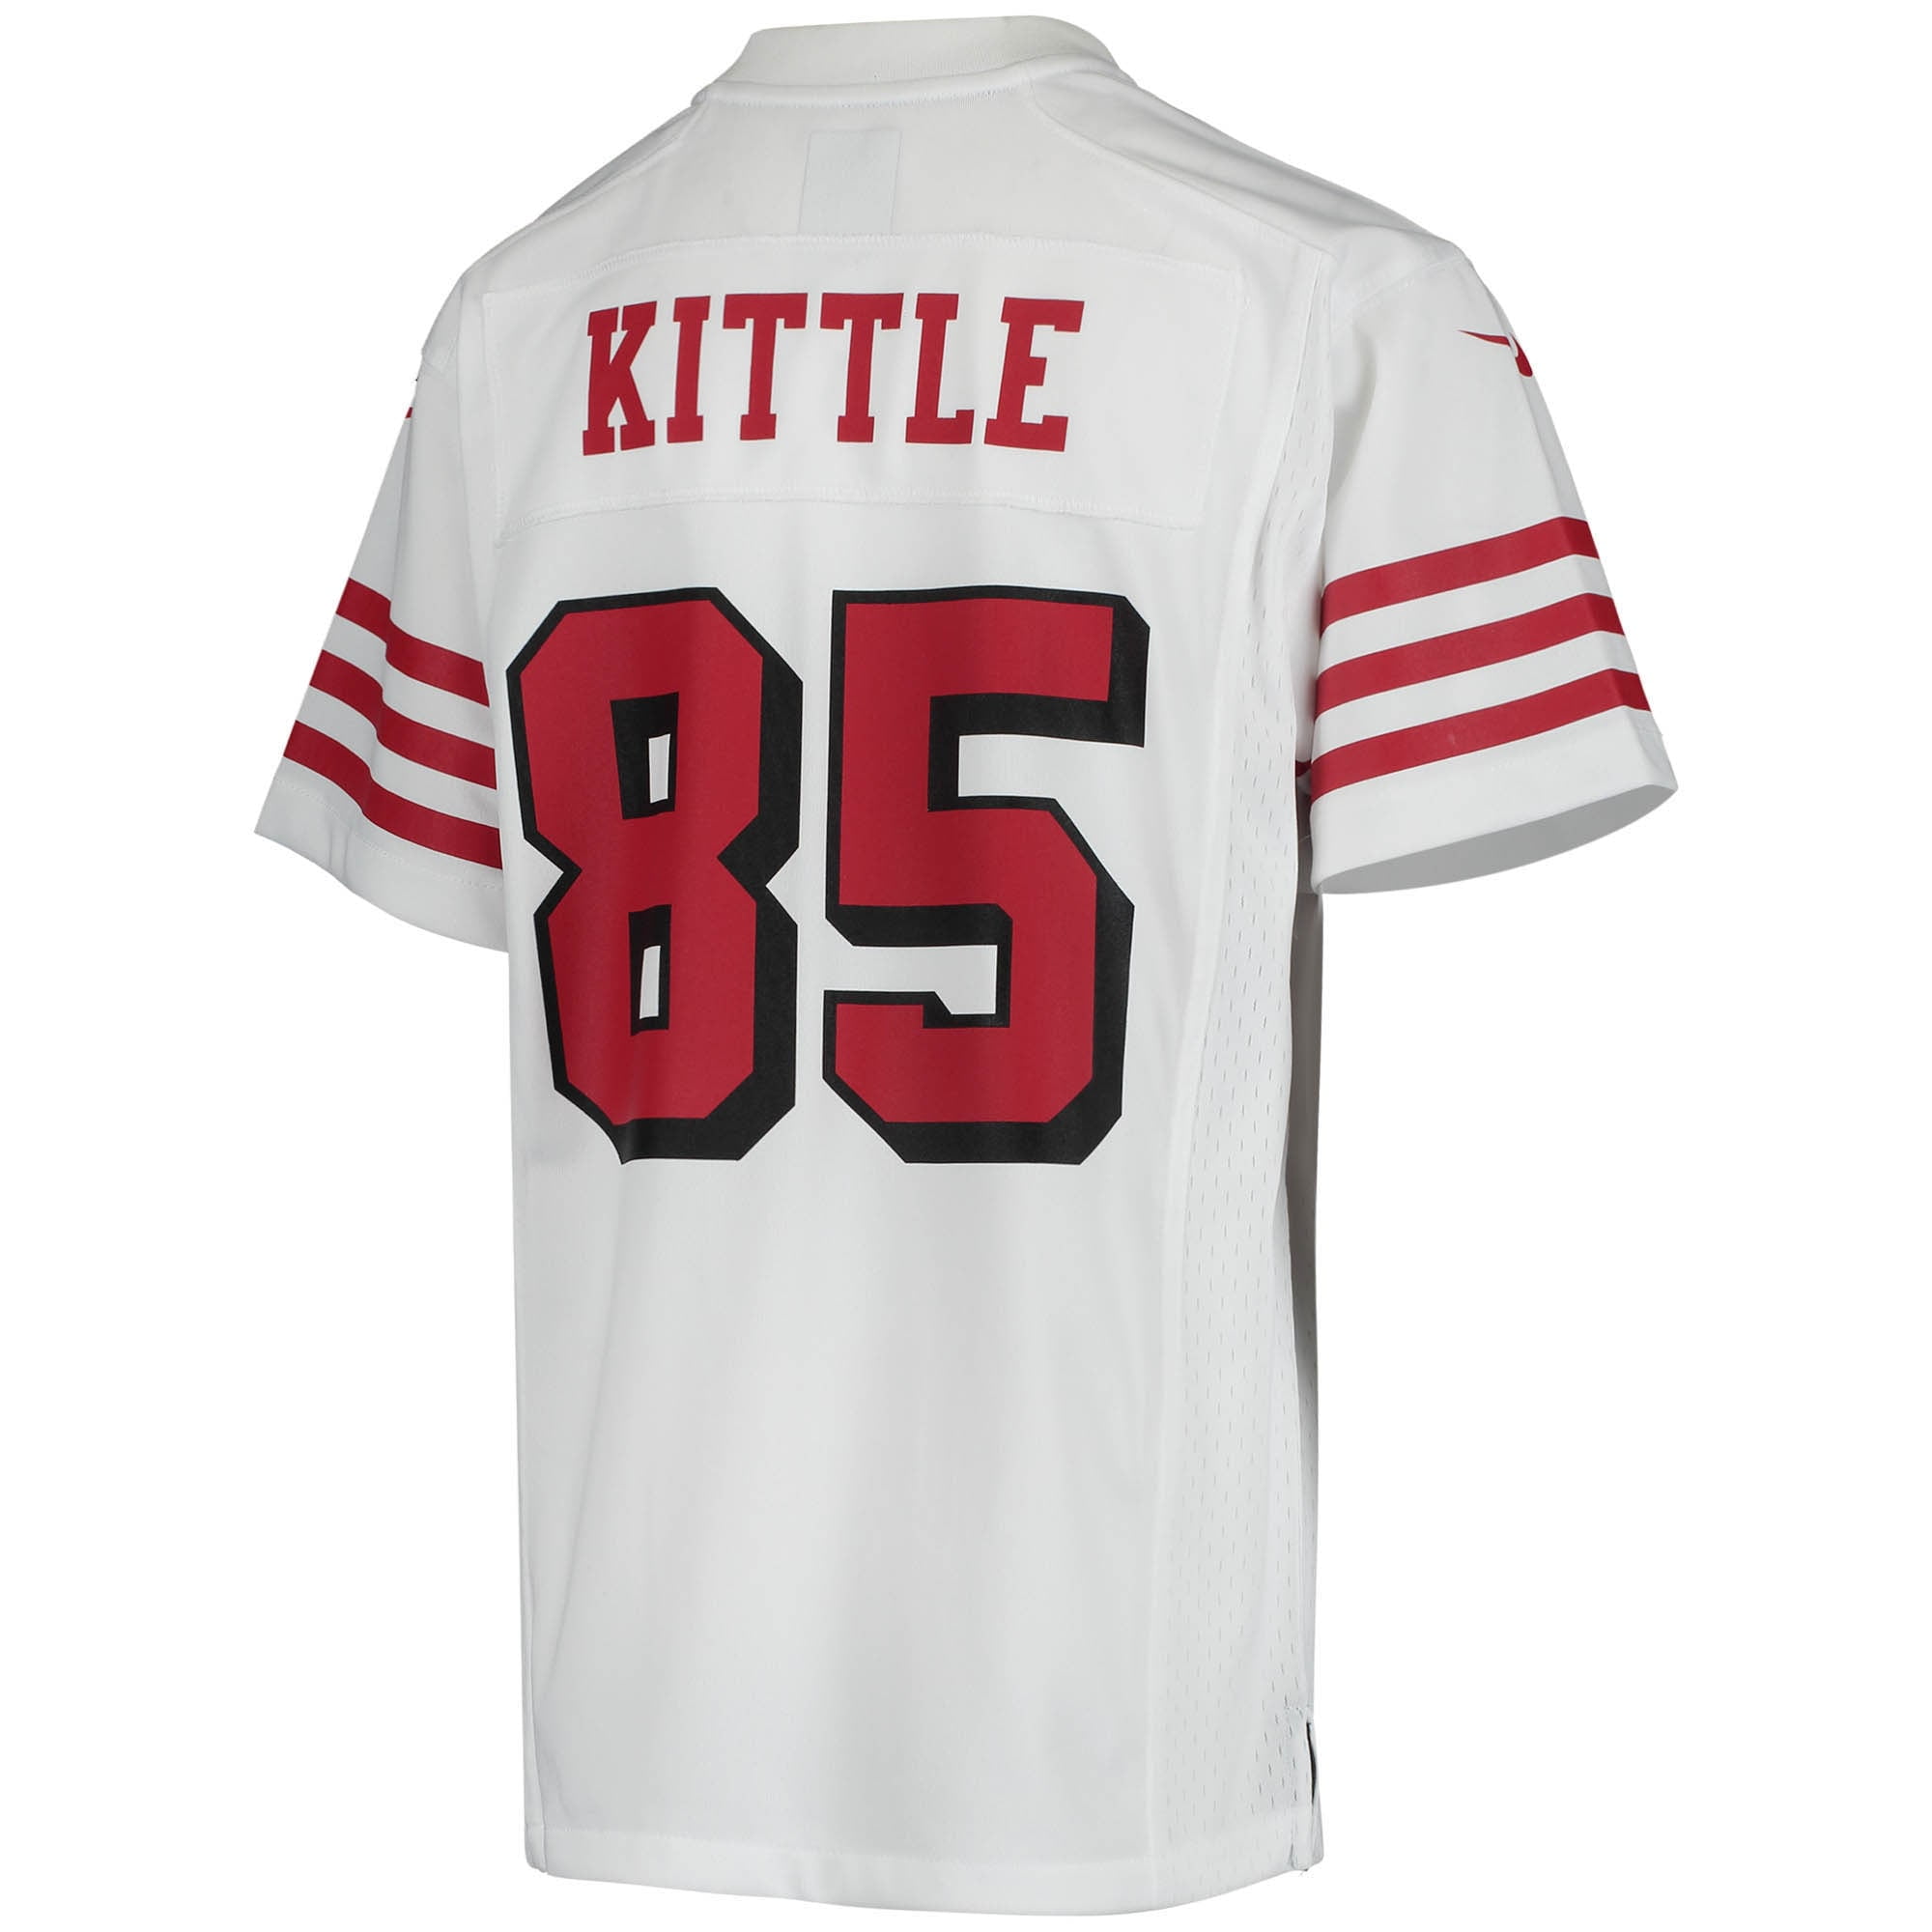 kittle color rush